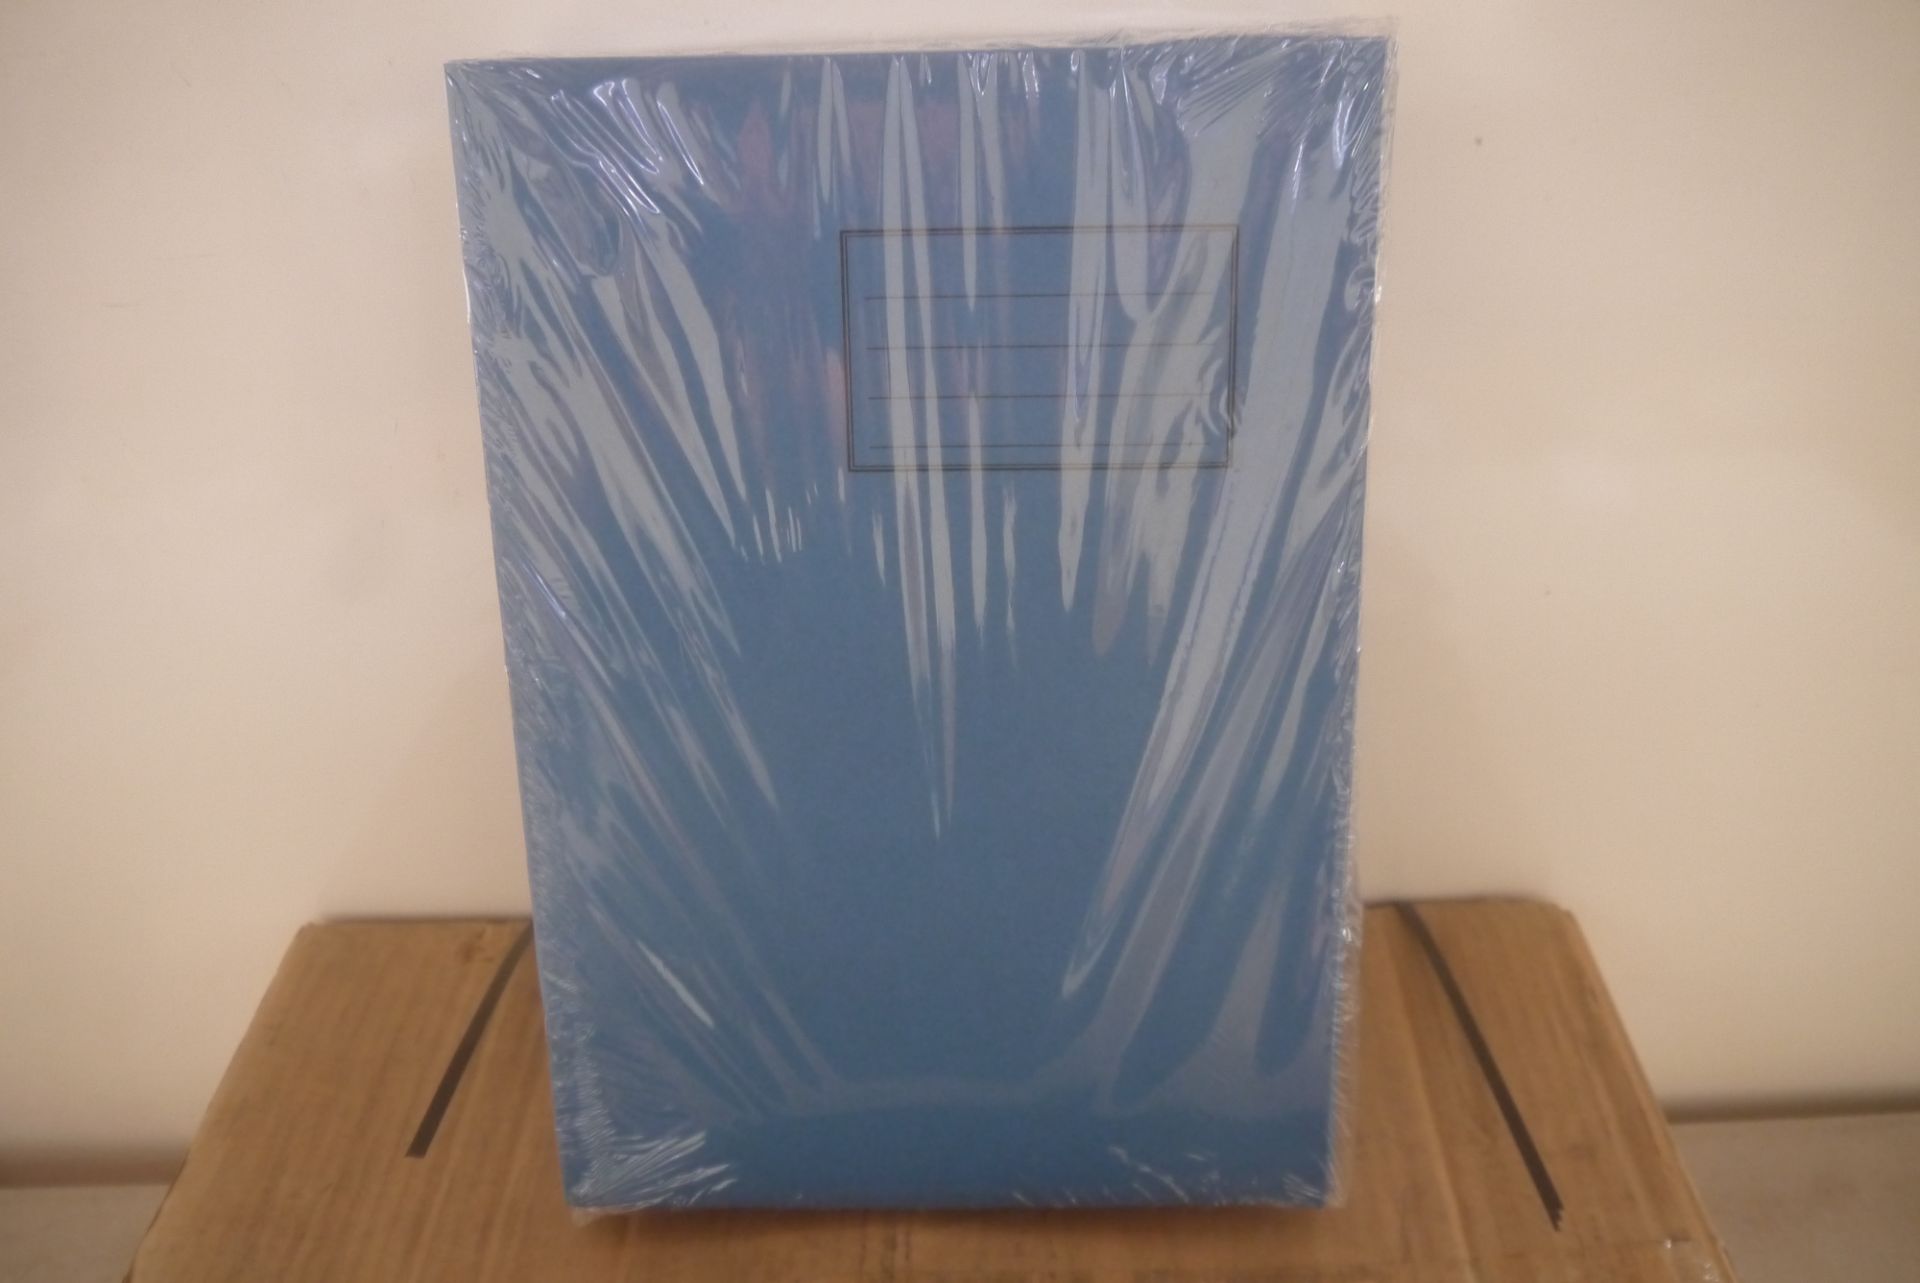 100x A4 24P plain light blue exercise books, brand new and boxed. RRP £35.09